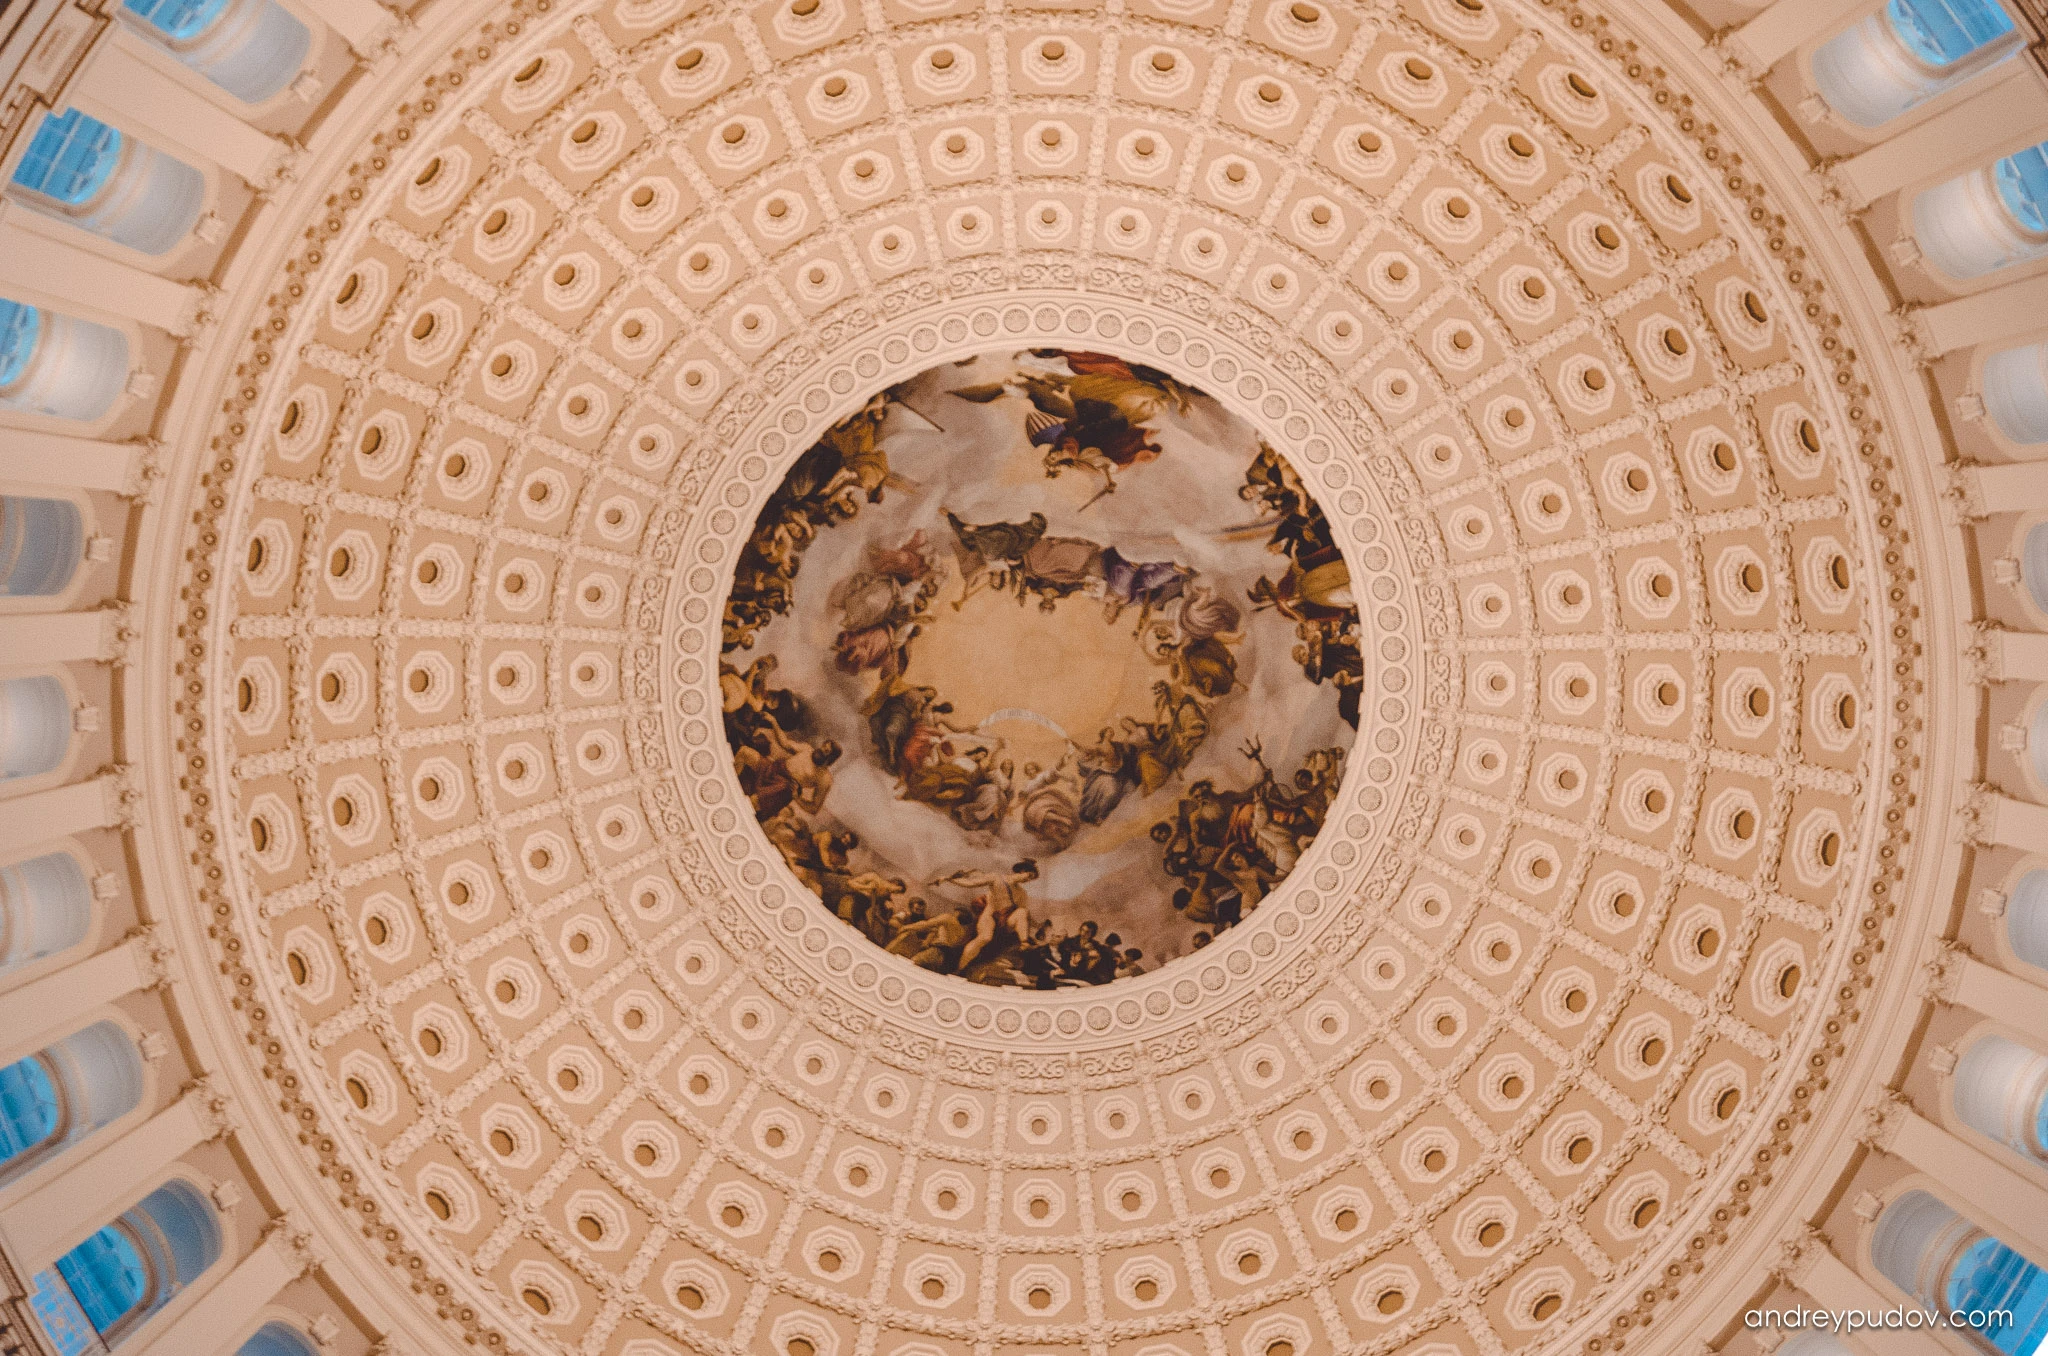 Conquering America - The Apotheosis of Washington

The Apotheosis of Washington is the fresco painted by Greek-Italian artist Constantino Brumidi in 1865 and visible through the oculus of the dome in the rotunda of the United States Capitol Building. The fresco is suspended 55 meters above the rotunda floor and covers an area of 433.3 square meters. The figures painted are up to 4.6 meters tall and are visible from the floor below. The dome was completed in 1863, and Brumidi painted it over the course of 11 months at the end of the Civil War. He was paid $40,000 ($676,261 in today's funds) for the fresco.

Brumidi had worked for three years in the Vatican under Pope Gregory XVI, and served several aristocrats as an artist for palaces and villas, including the prince Torlonia. He immigrated to the United States in 1852, and spent much of the last 25 years of his life working in the Capitol. In addition to The Apotheosis of Washington he designed the Brumidi Corridors.